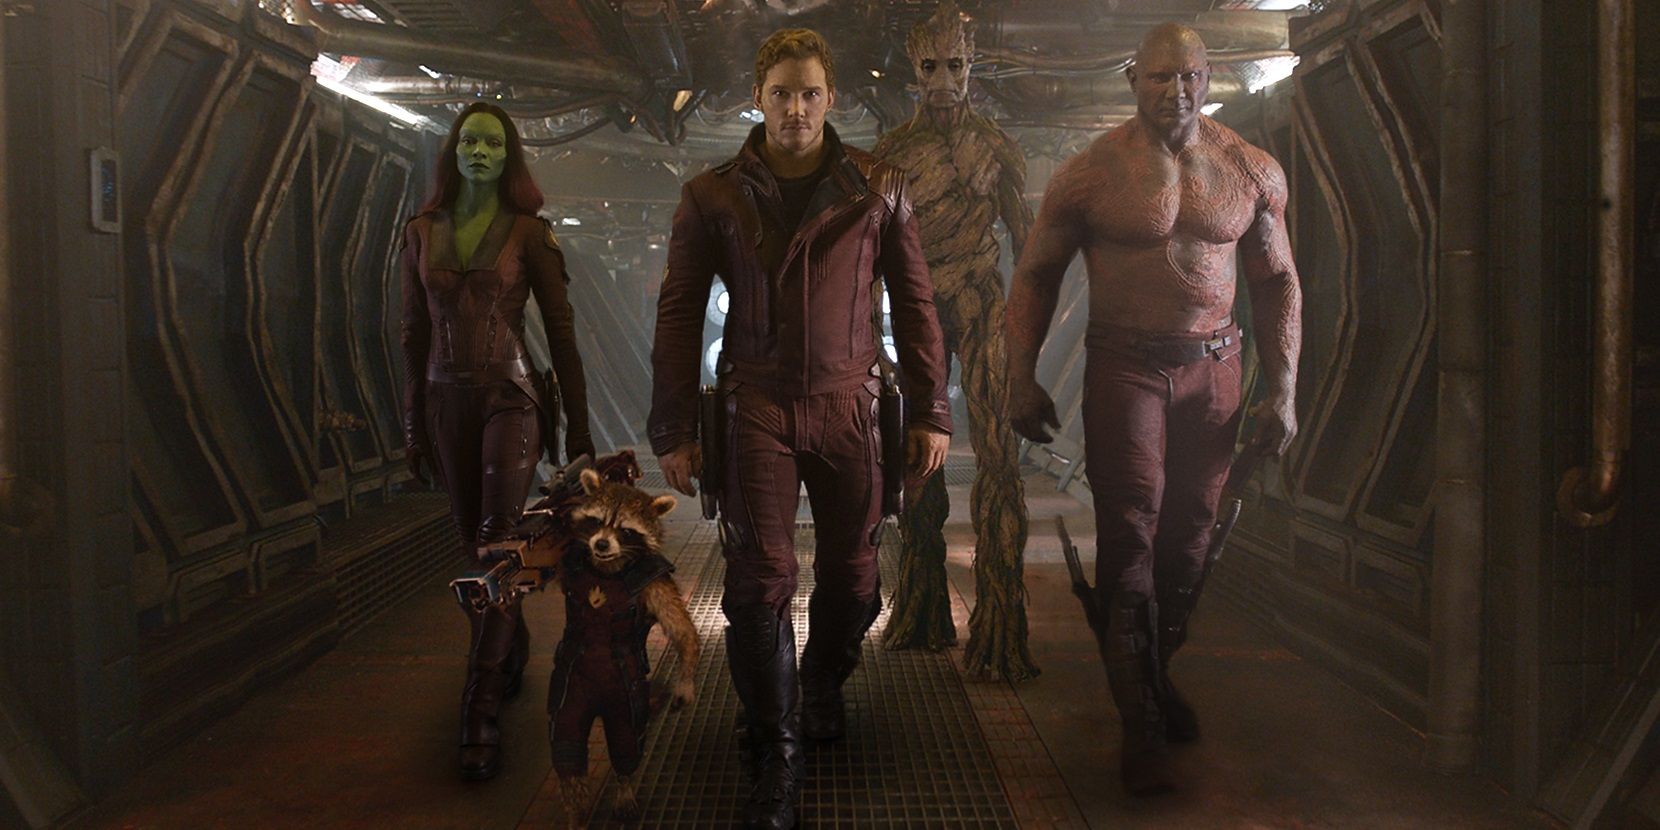 Guardians of the Galaxy walk together in matching uniforms in the Guardians of the Galaxy 